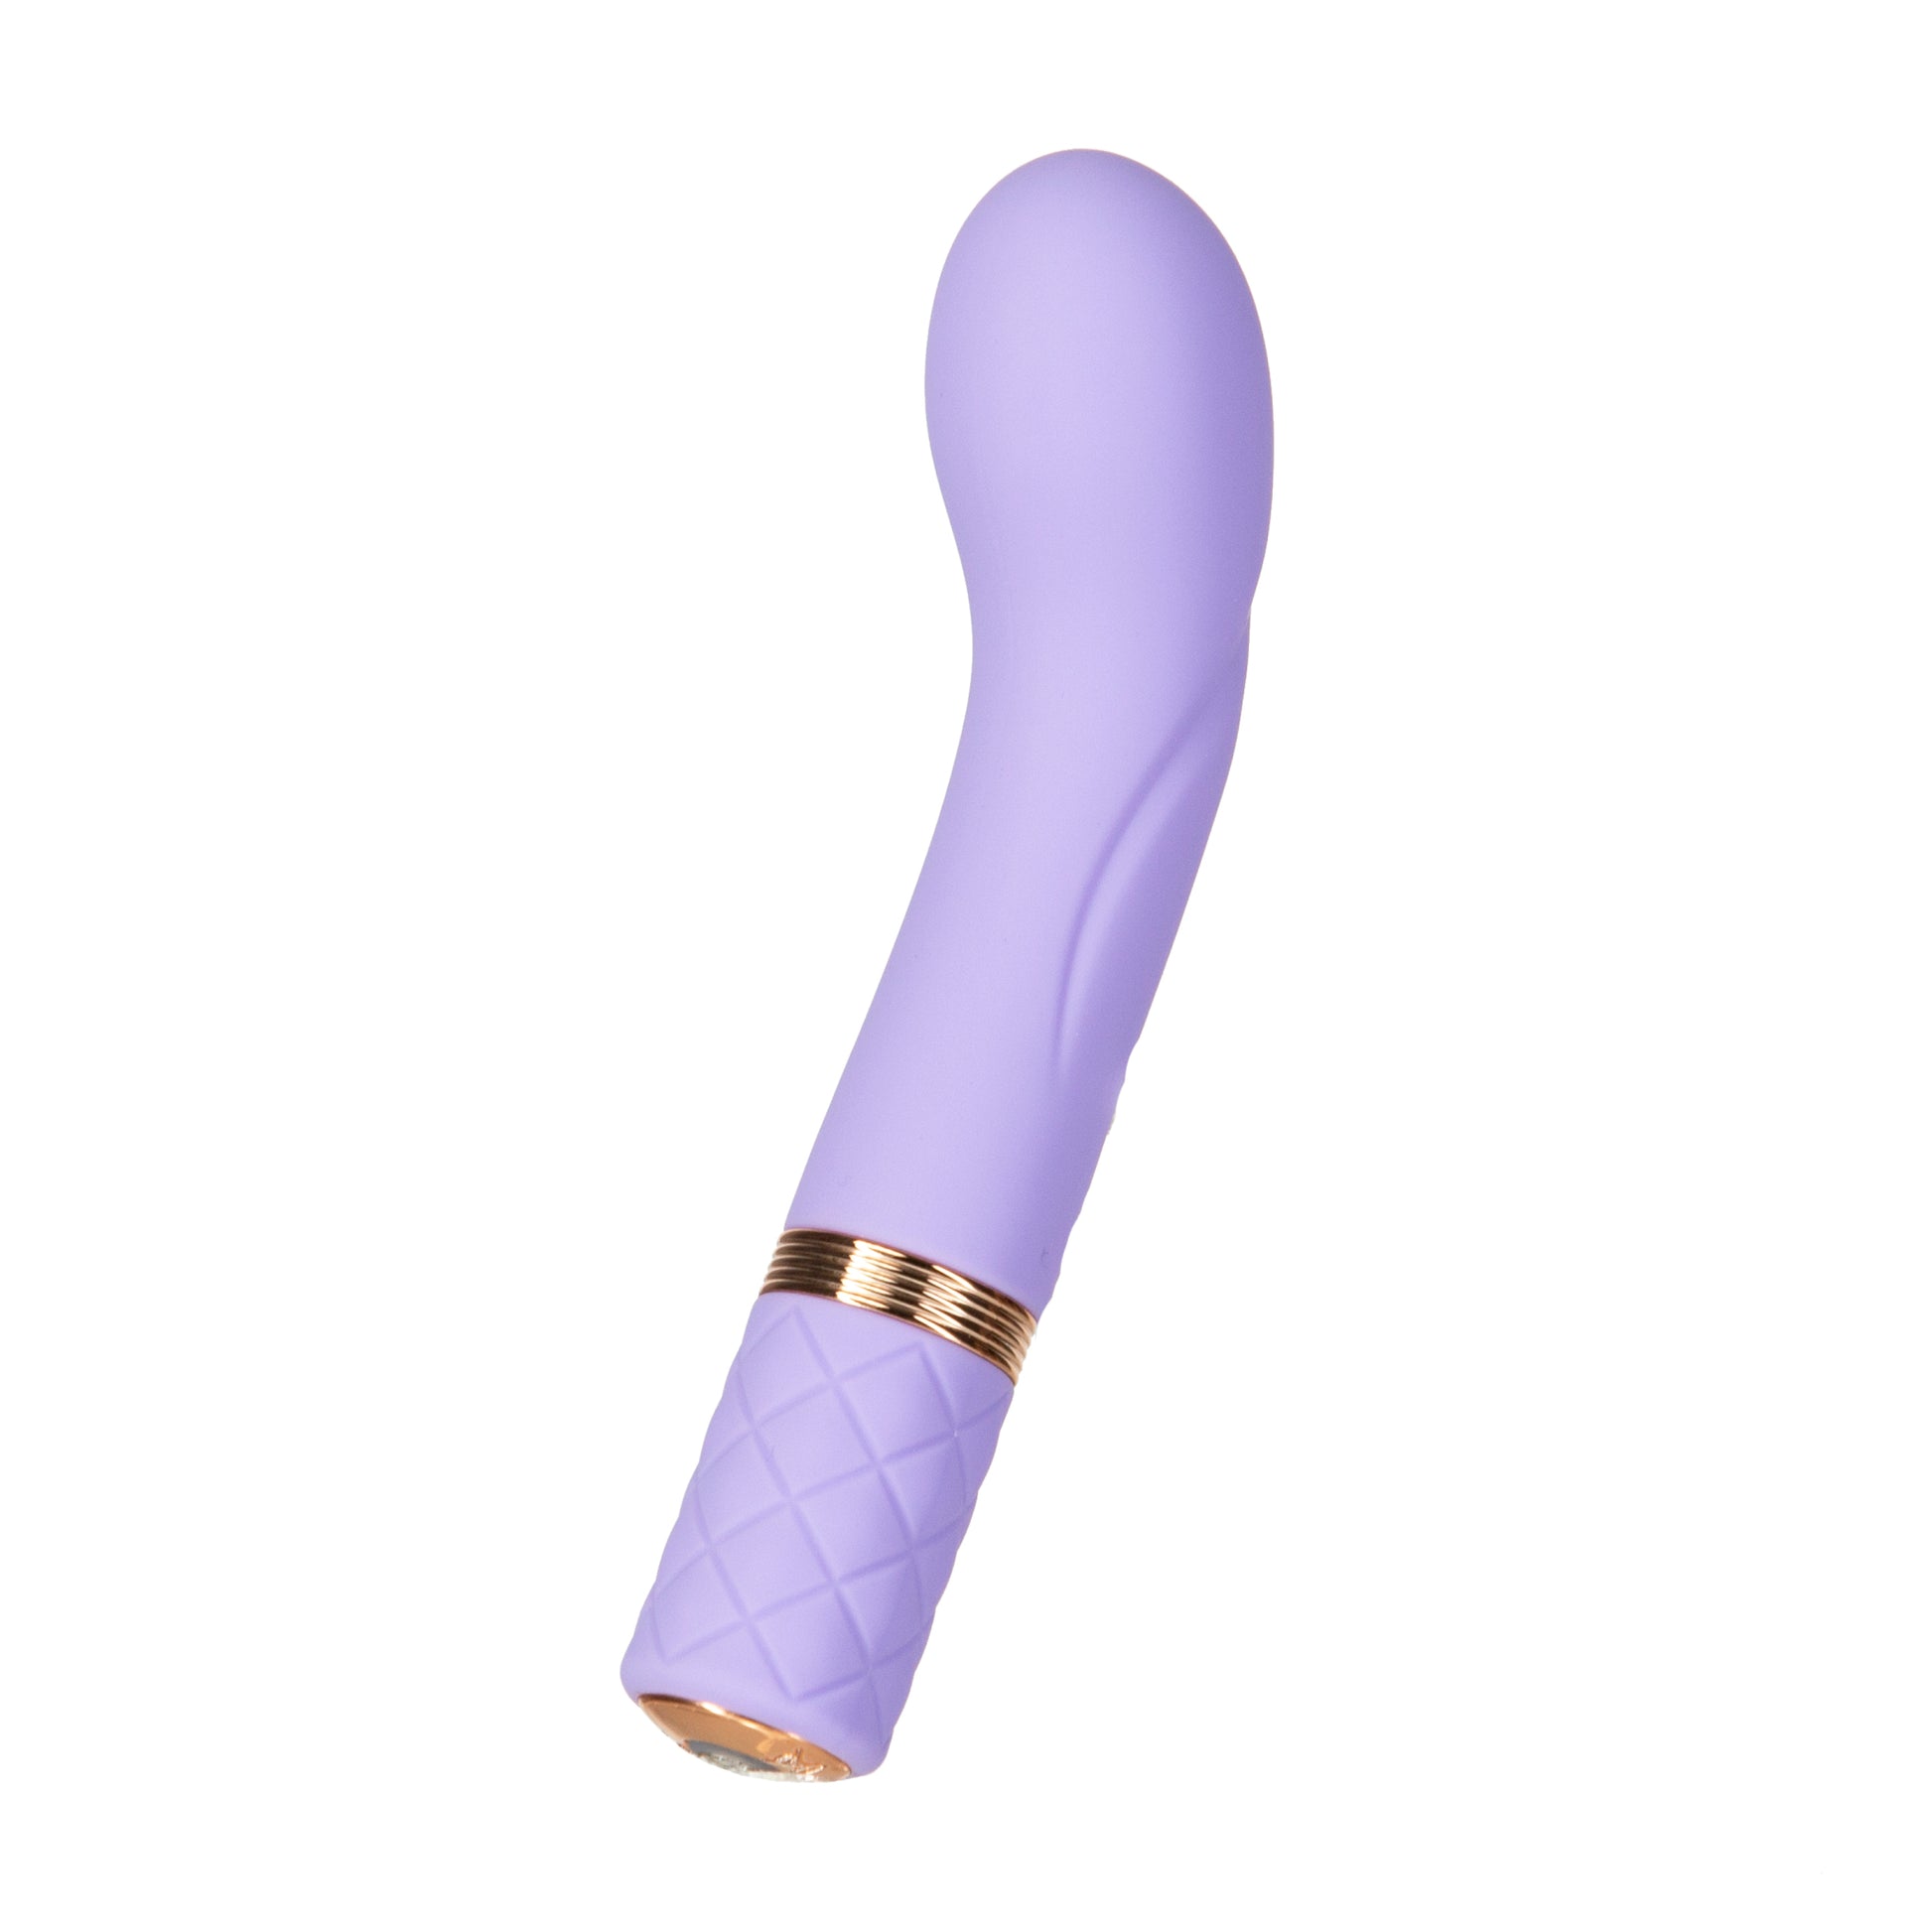 Side angle view of the toy shows its larger head for G-spot stimulation and textured handle (purple).